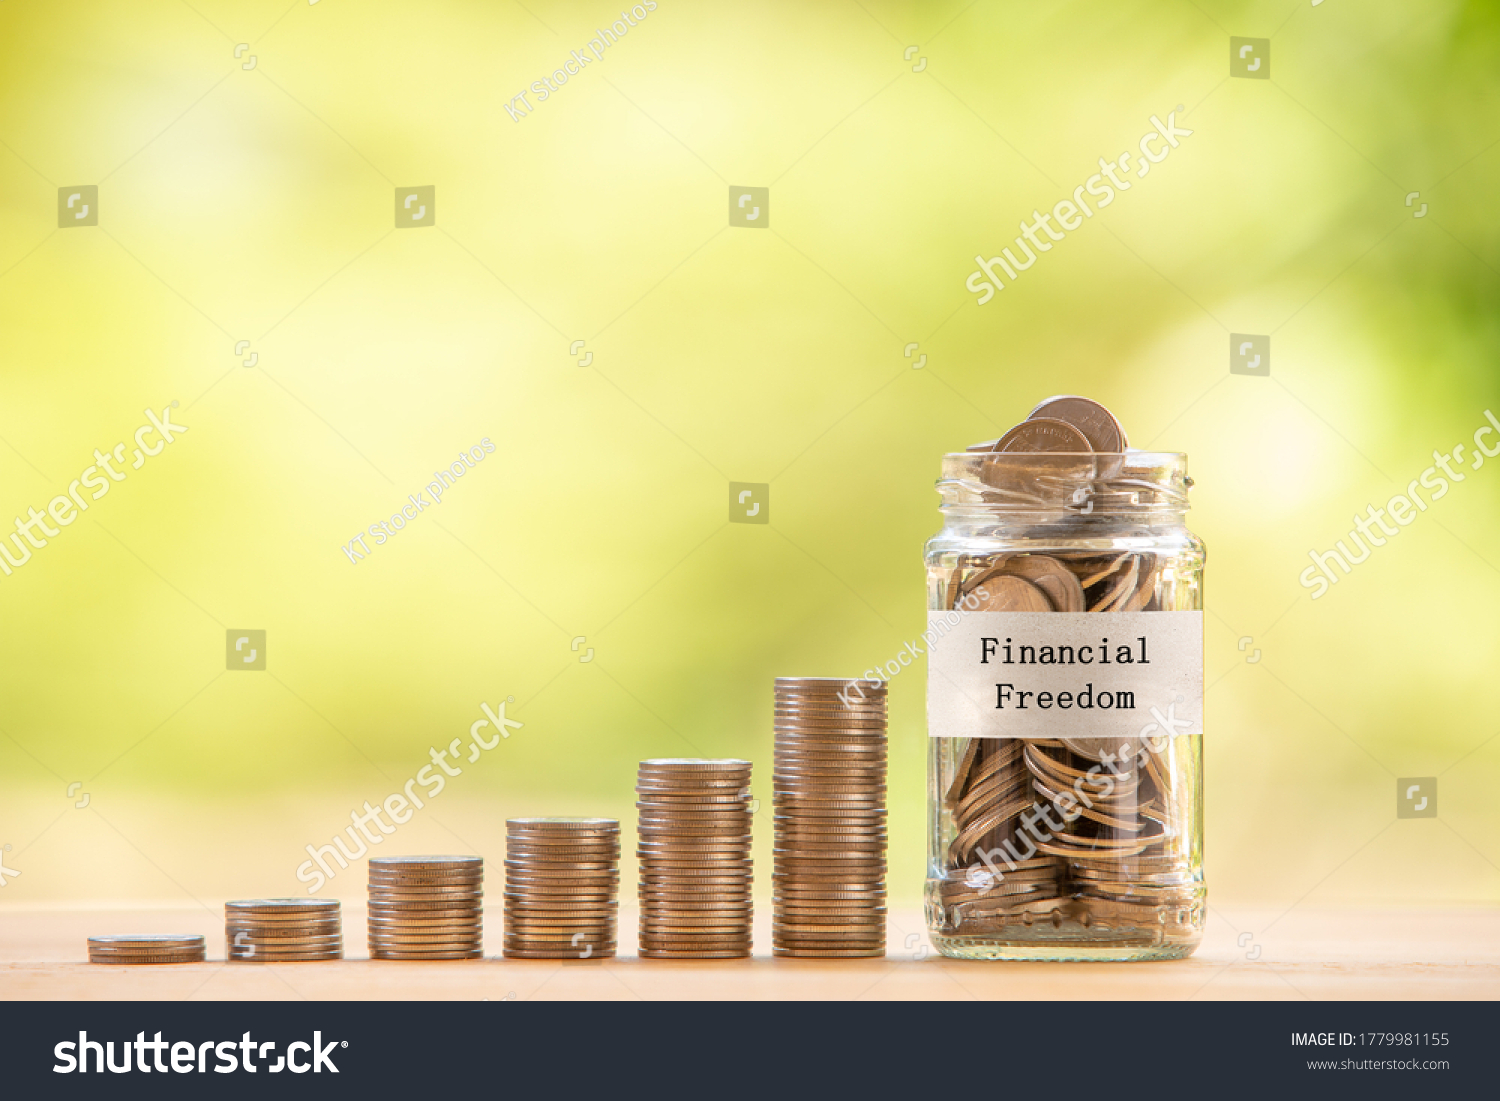 A glass jar with text label "financial freedom" filled with coins placed beside a pile of coins. Saving money for financial independence or financial freedom concept. #1779981155